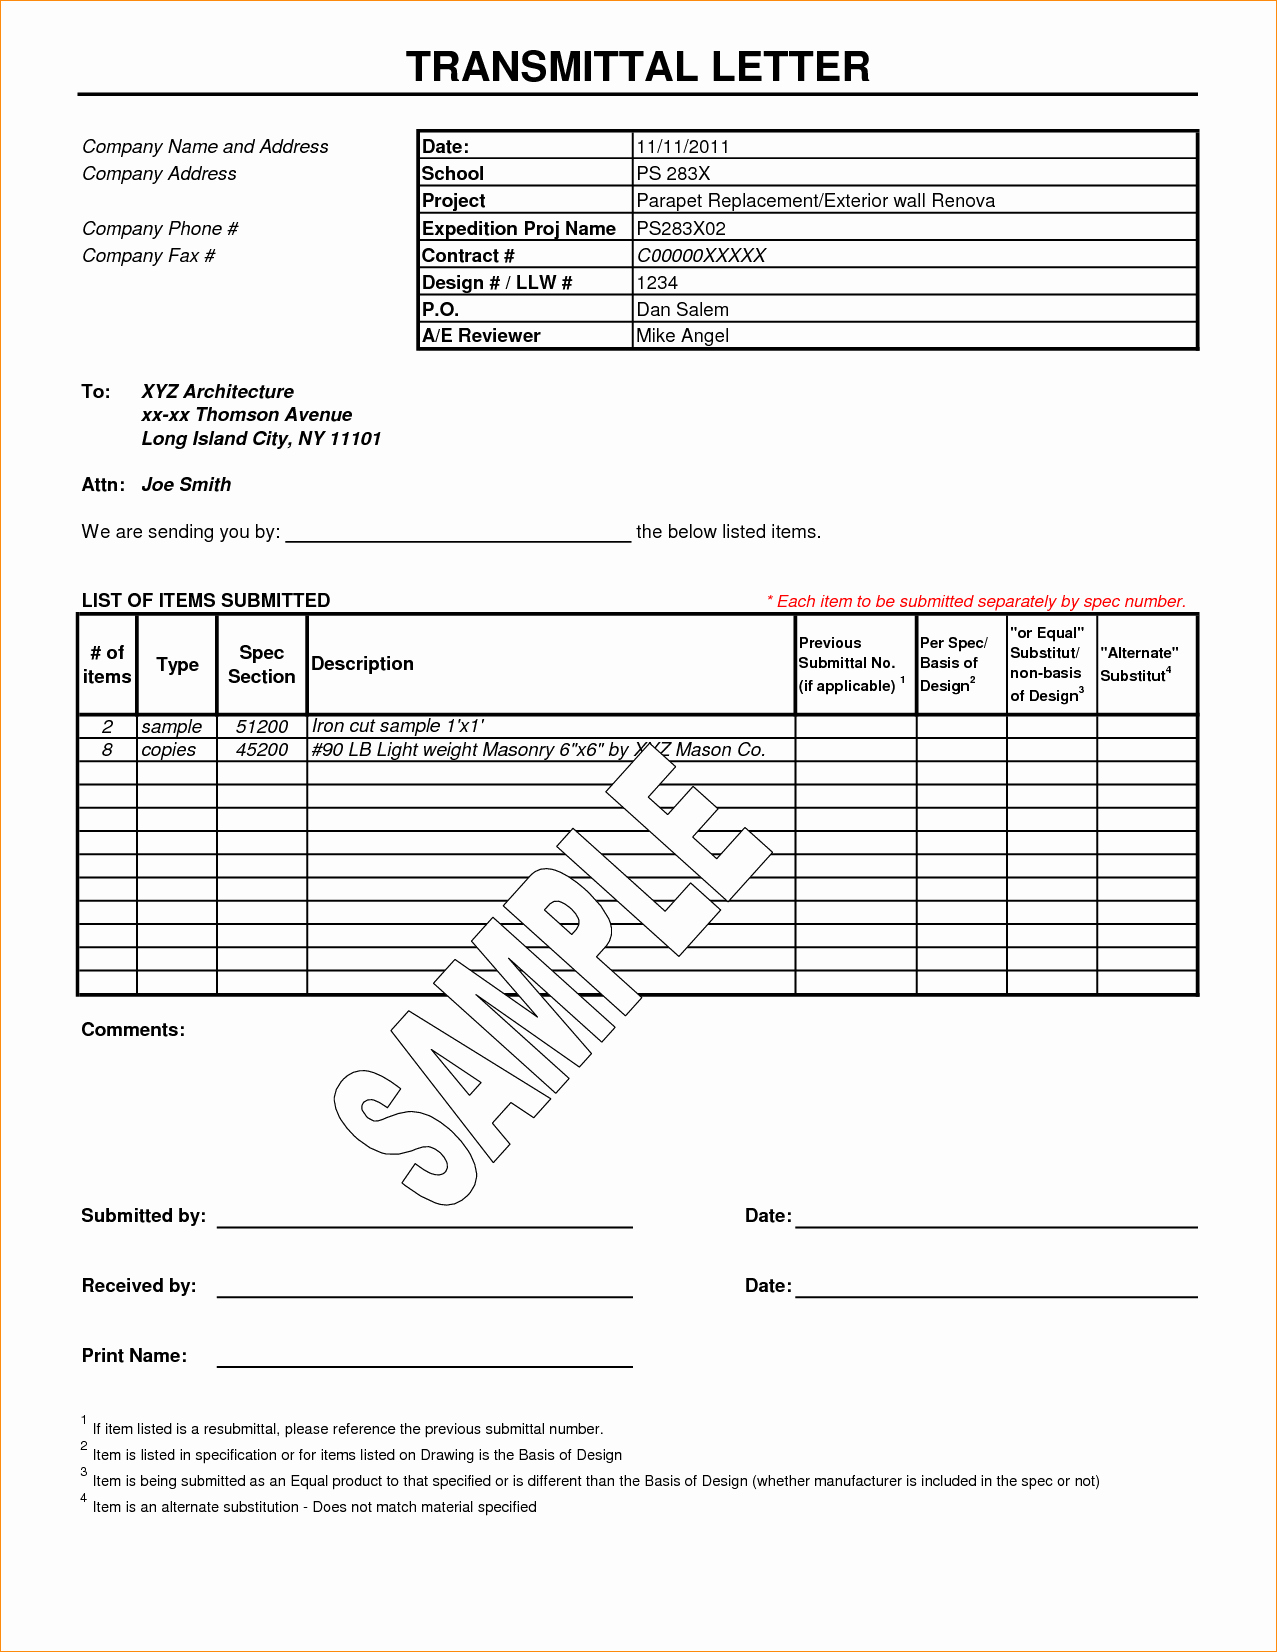 Construction Transmittal form Template Lovely 23 Of Transmittal Sheet Template